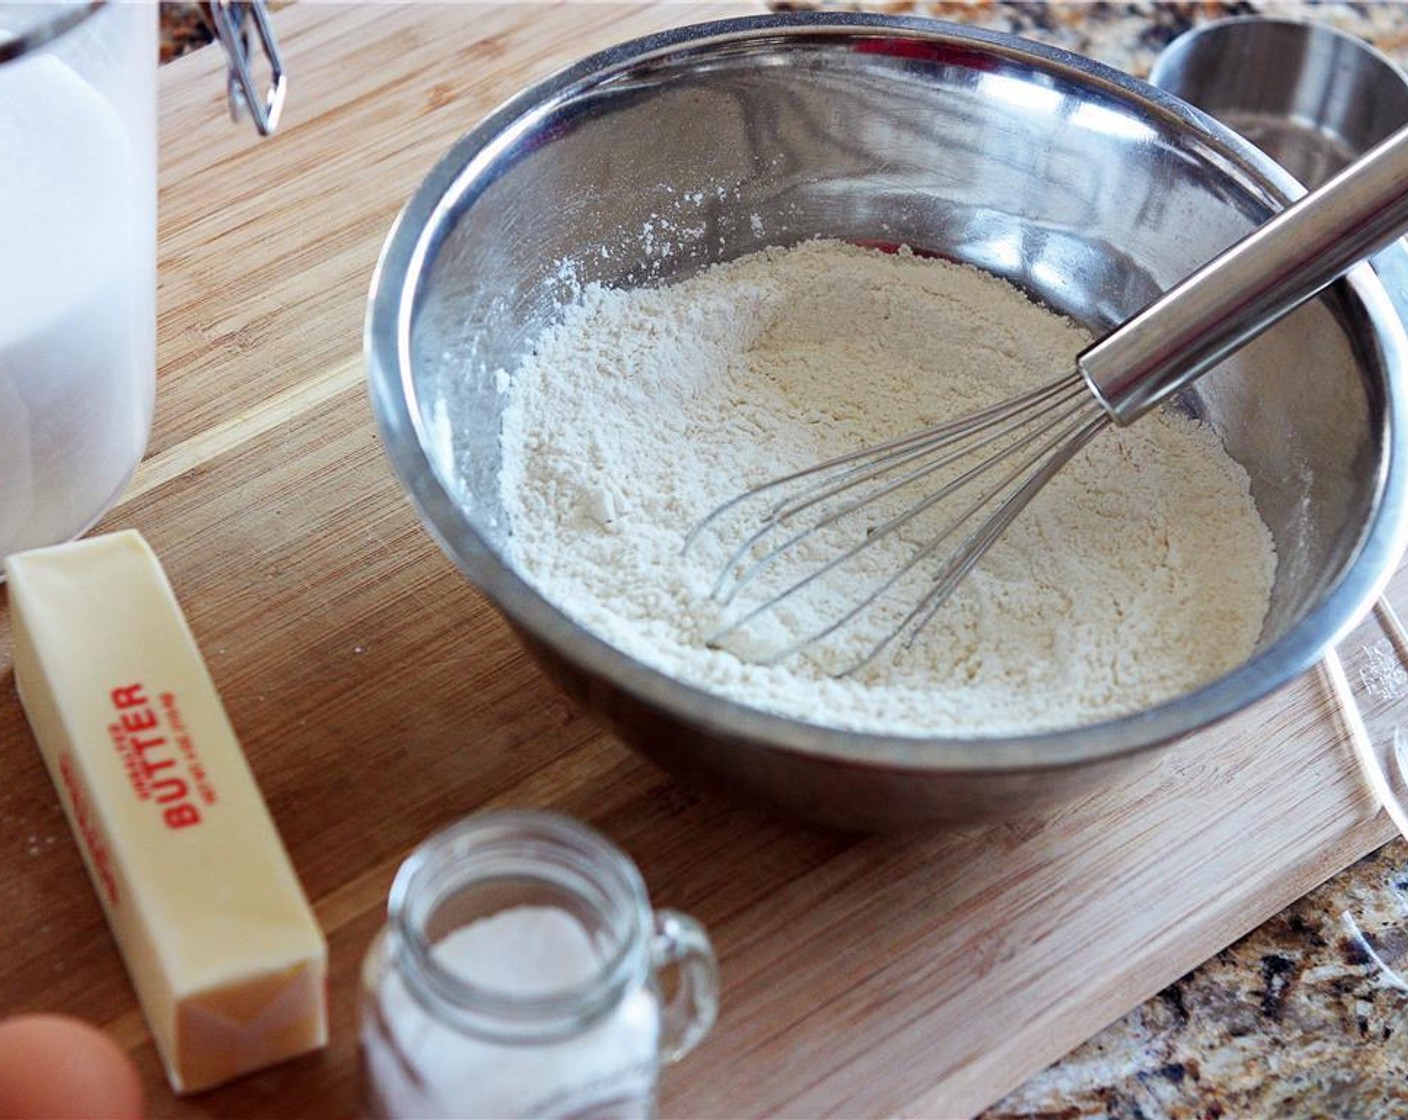 step 1 In a medium bowl, whisk together the dry ingredients: All-Purpose Flour (1 1/2 cups), Baking Powder (1/2 Tbsp), and Salt (1/2 tsp). Set aside.